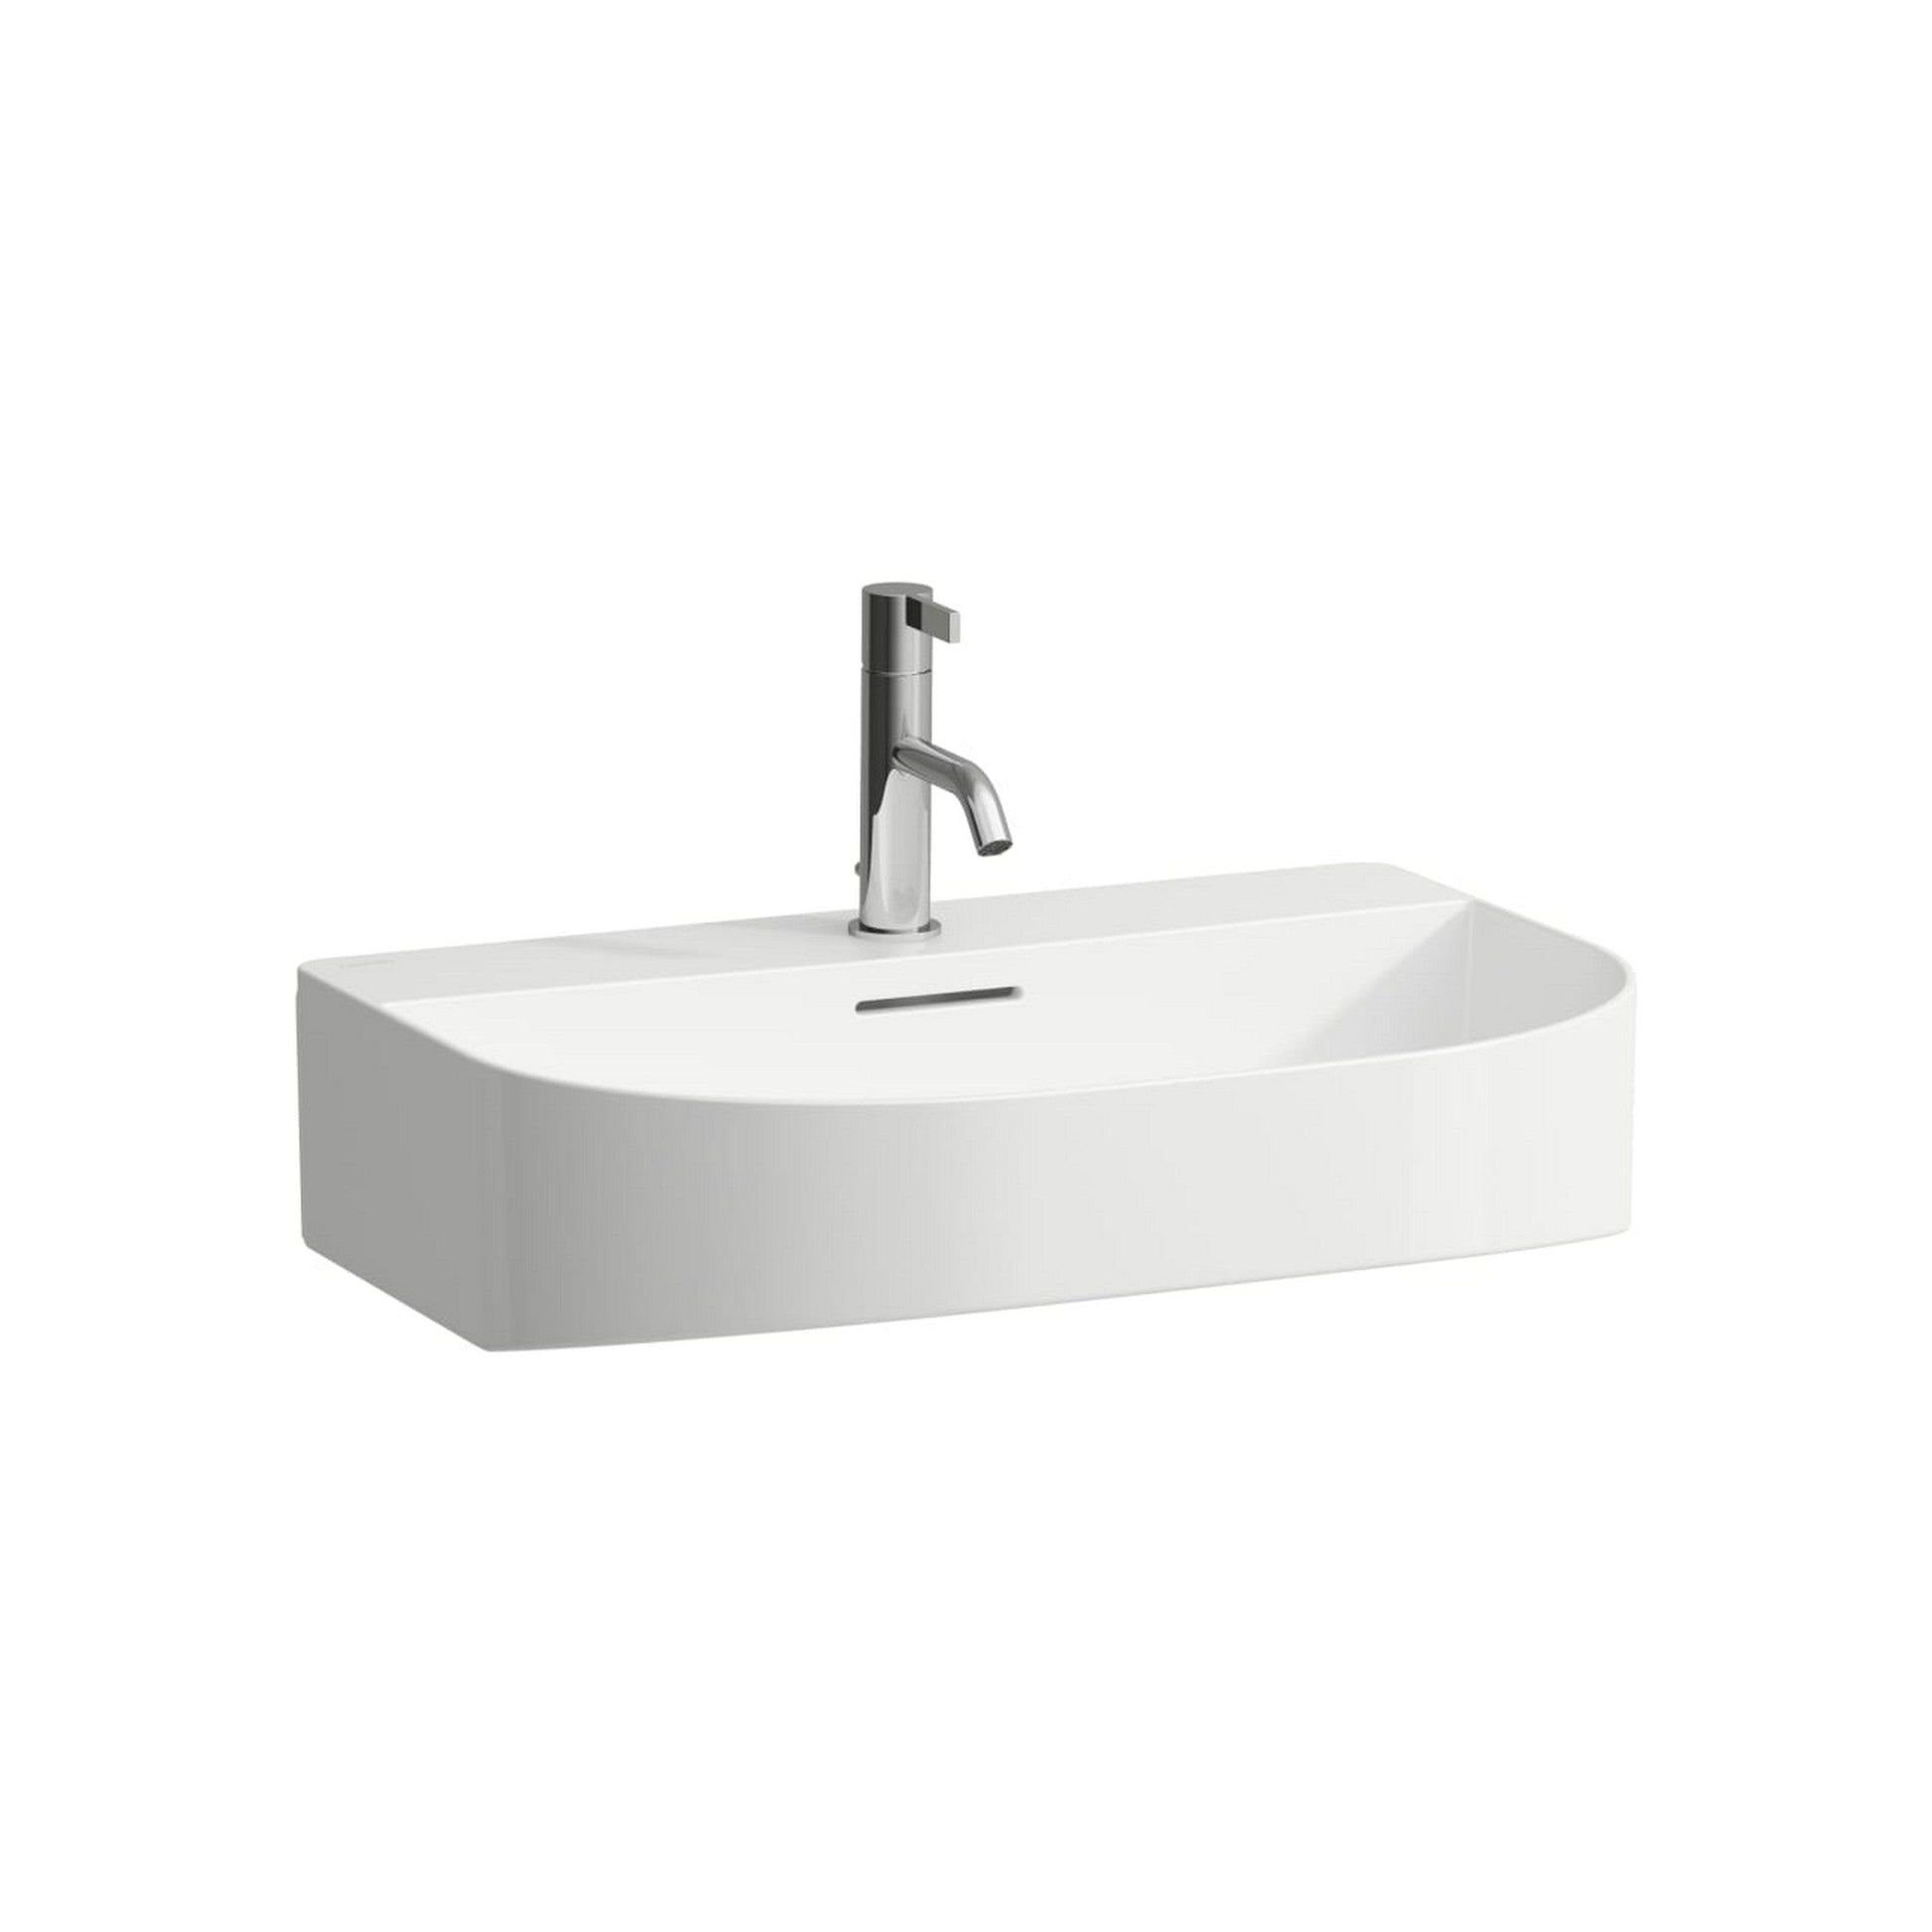 Laufen Sonar 24" White Ceramic Countertop Bathroom Sink With With Faucet Hole